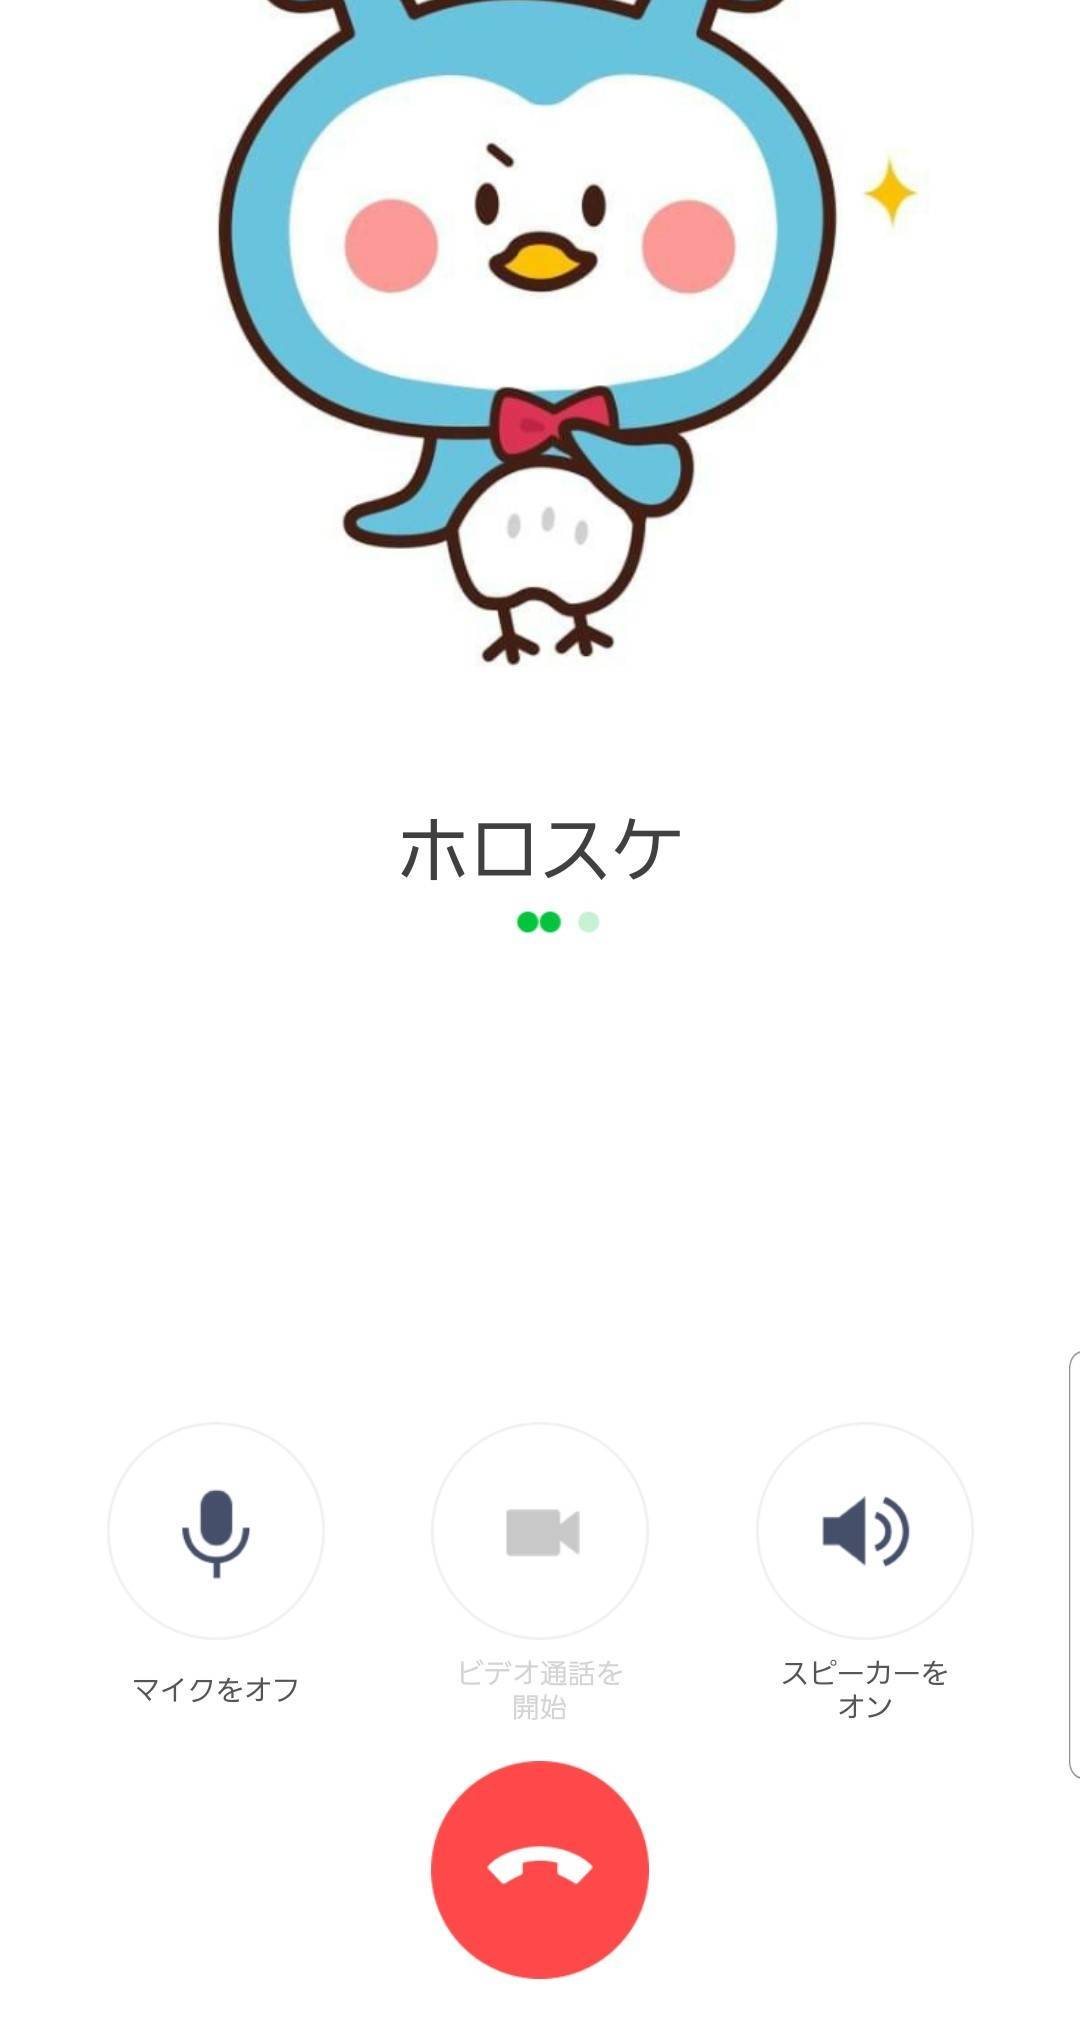 Lineで電話をかける方法 無料通話の発信 応答のやり方 Line Outの違いは Appliv Topics